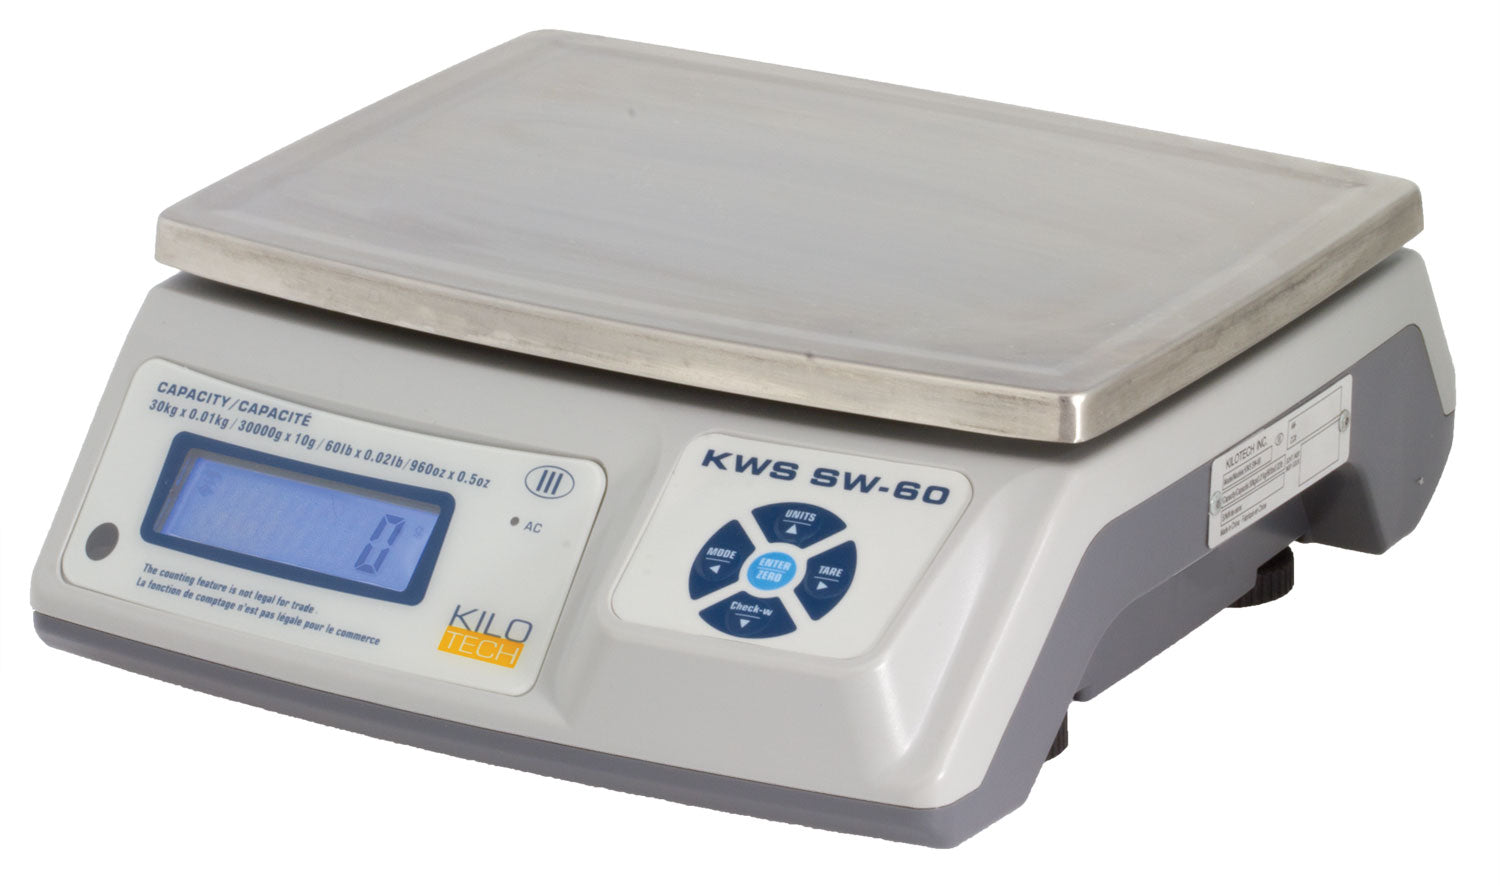 Taylor Precision 4.4lb Digital Kitchen Food Scale with Weighing Tray Blue